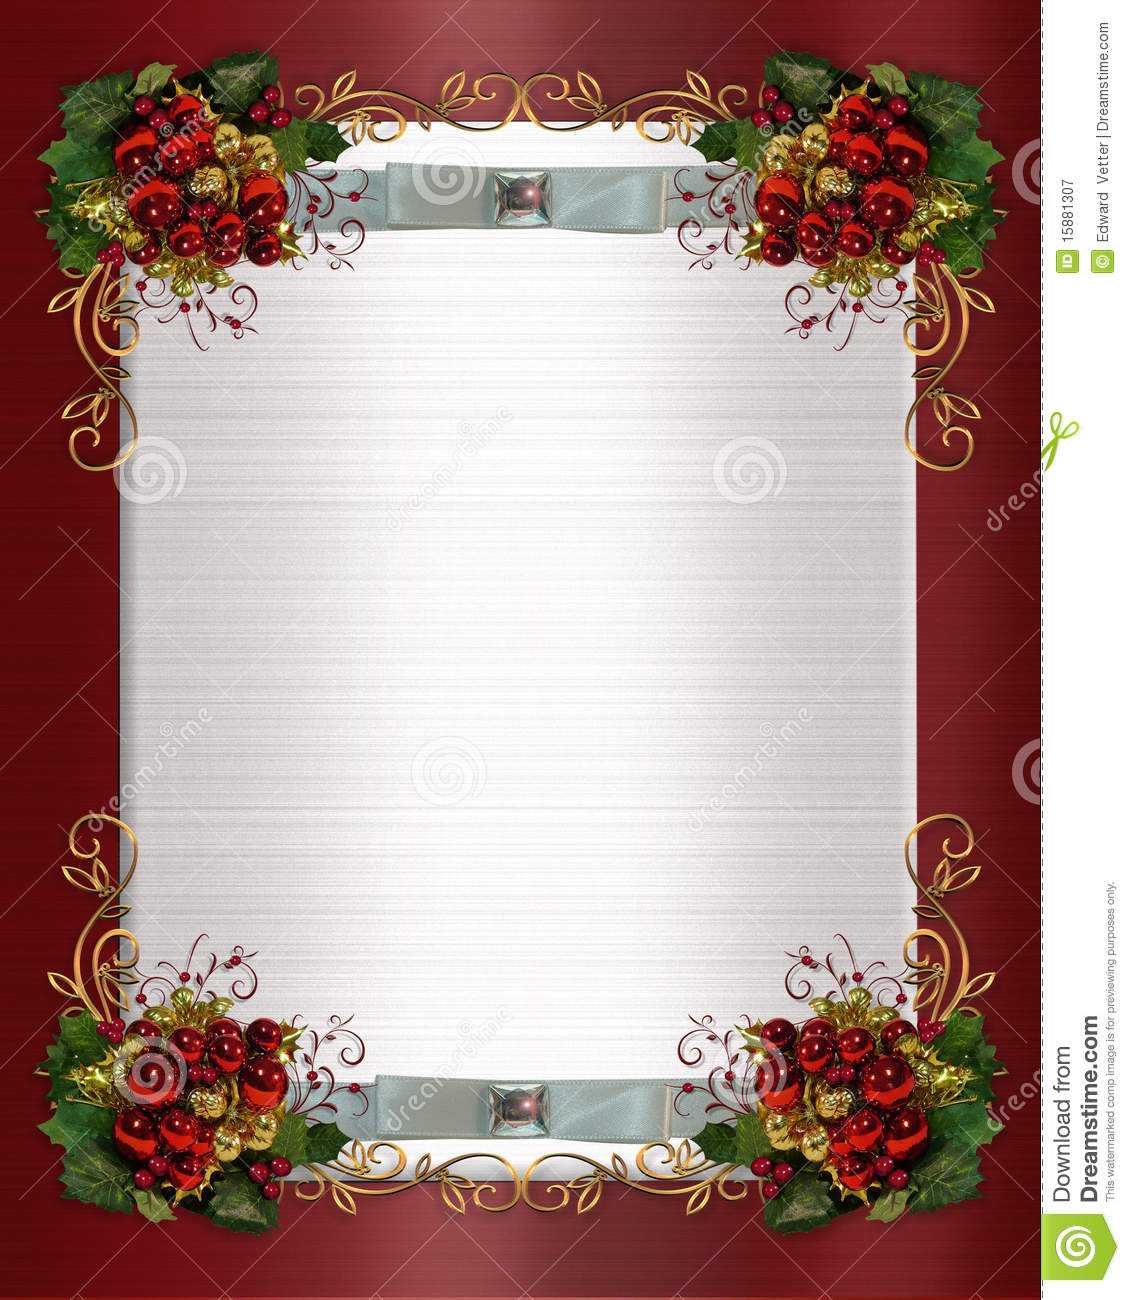 Christmas Or Winter Wedding Border Stock Illustration Throughout Free Christmas Invitation Templates For Word